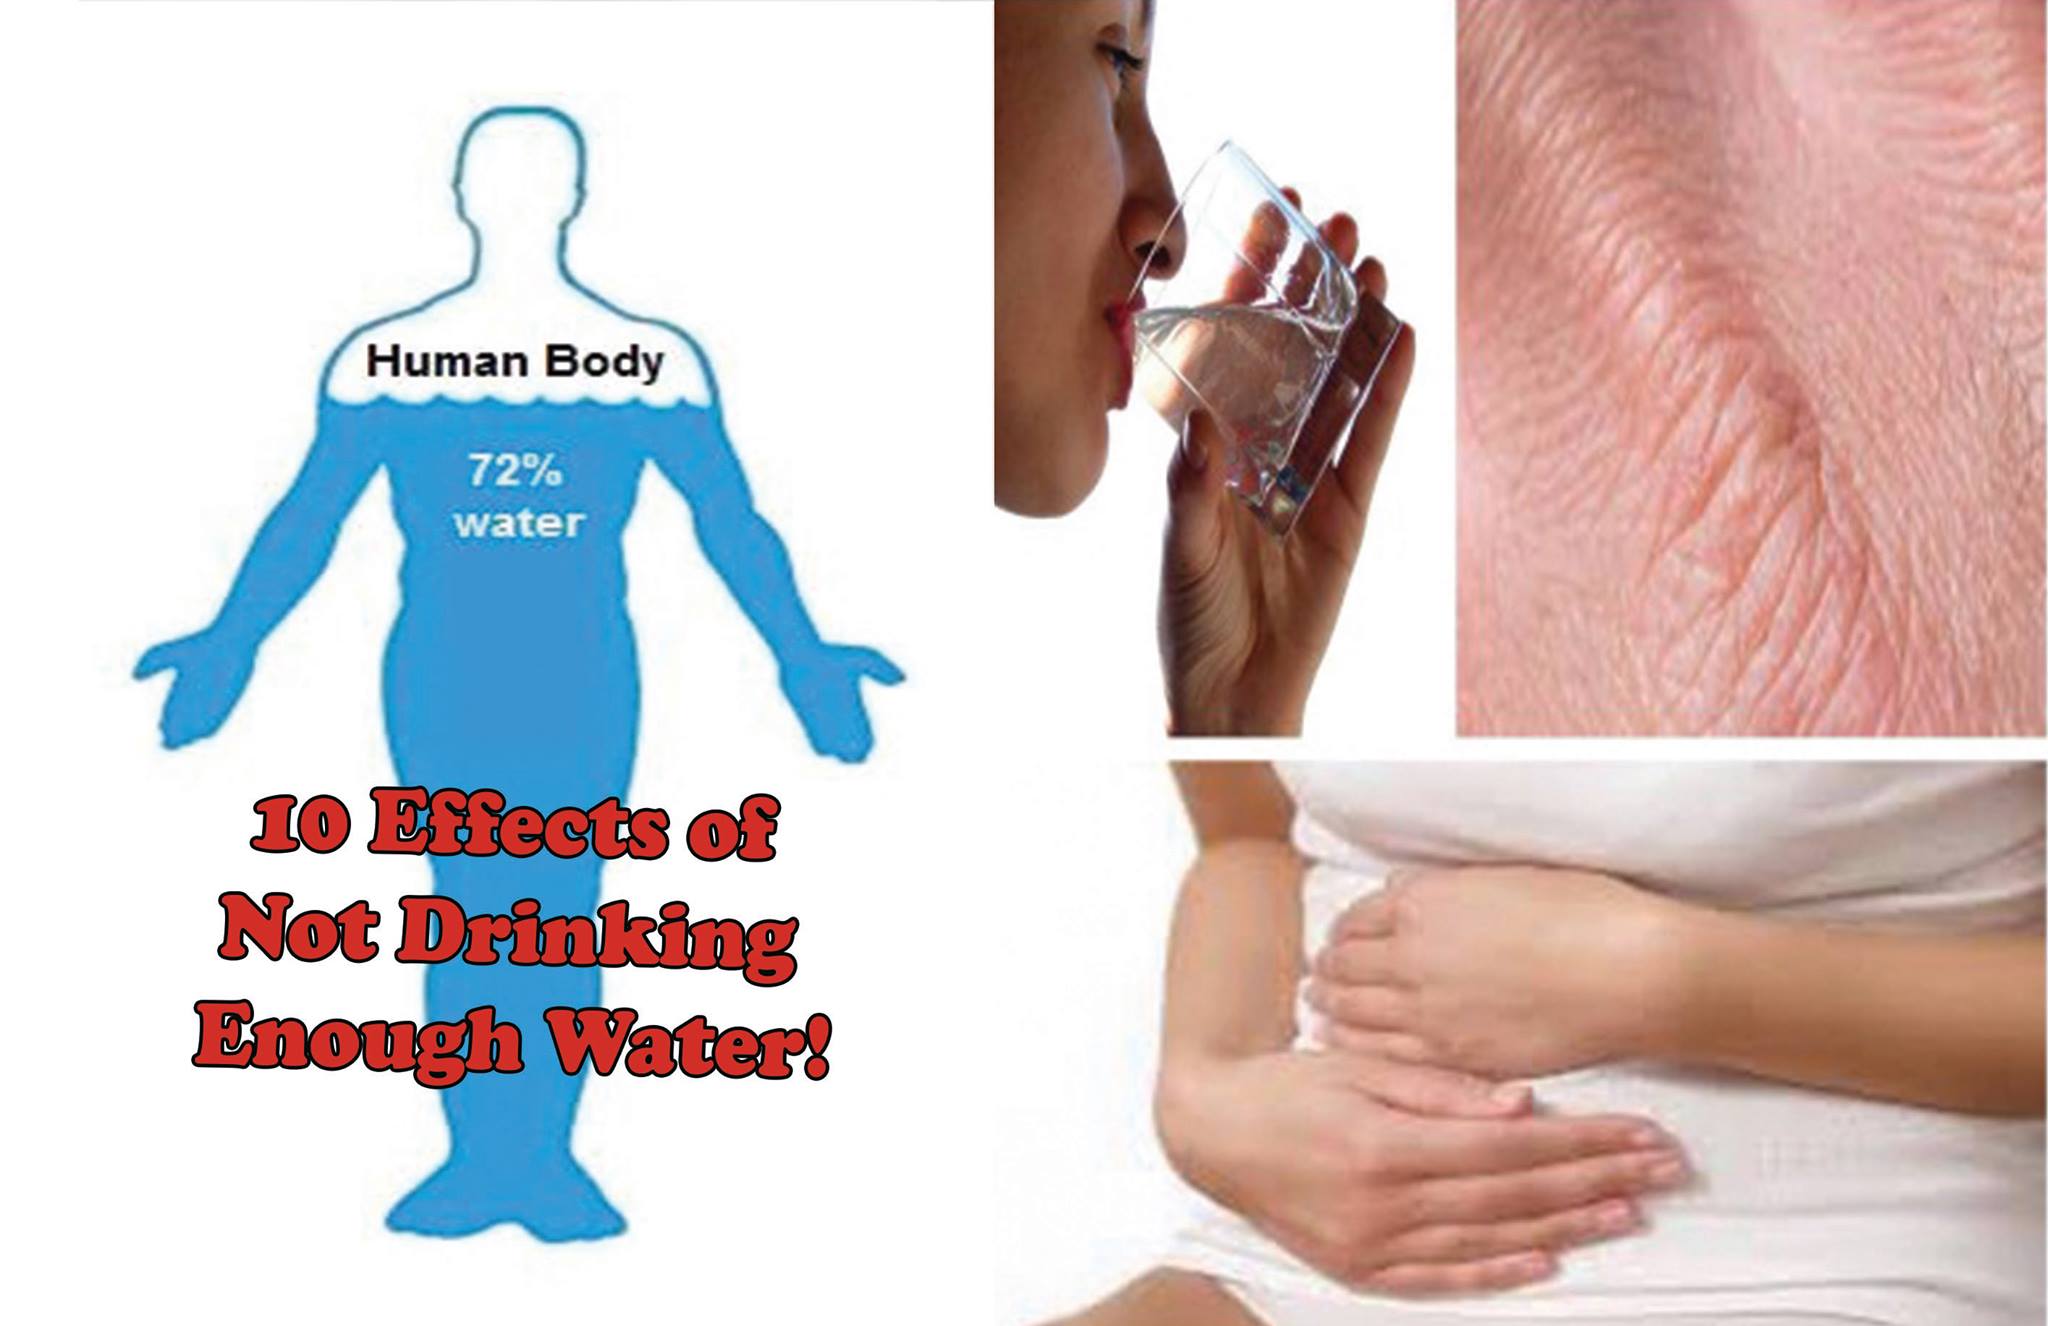 Effects drinking enough of water the not Signs and